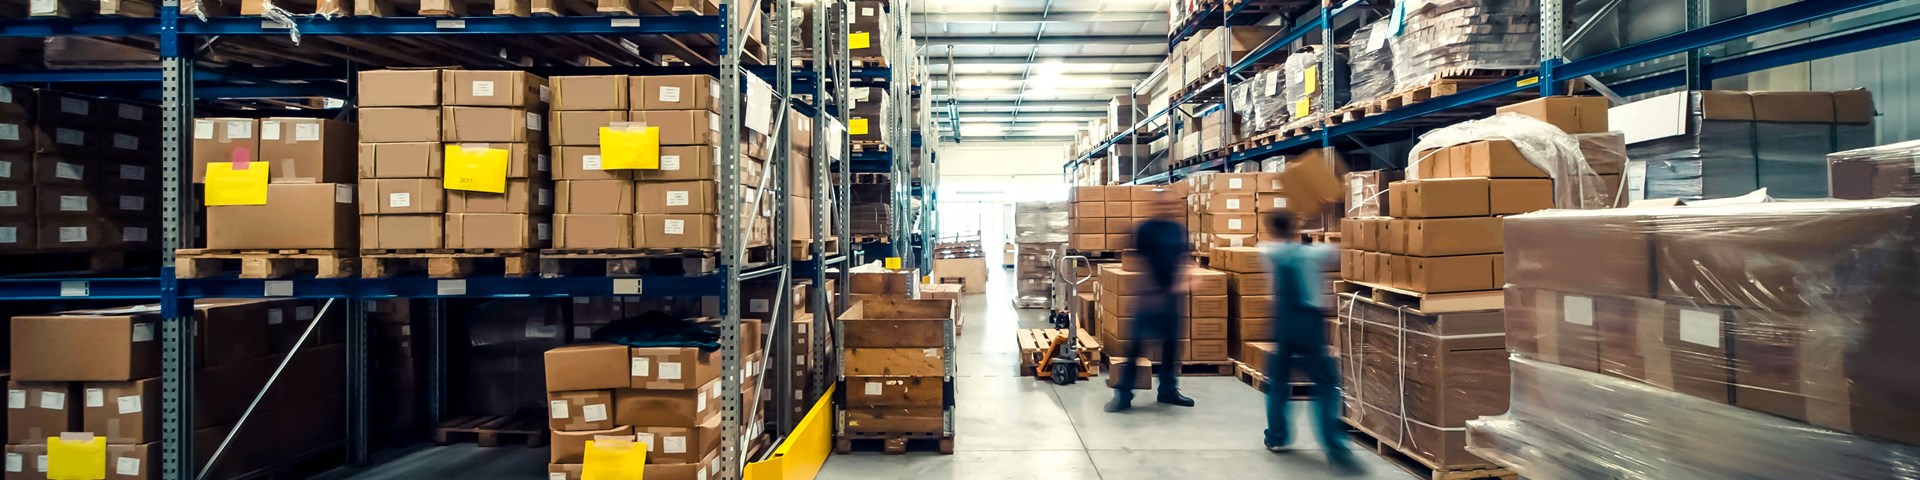 corporate insurance for warehousing companies in Northern Ireland